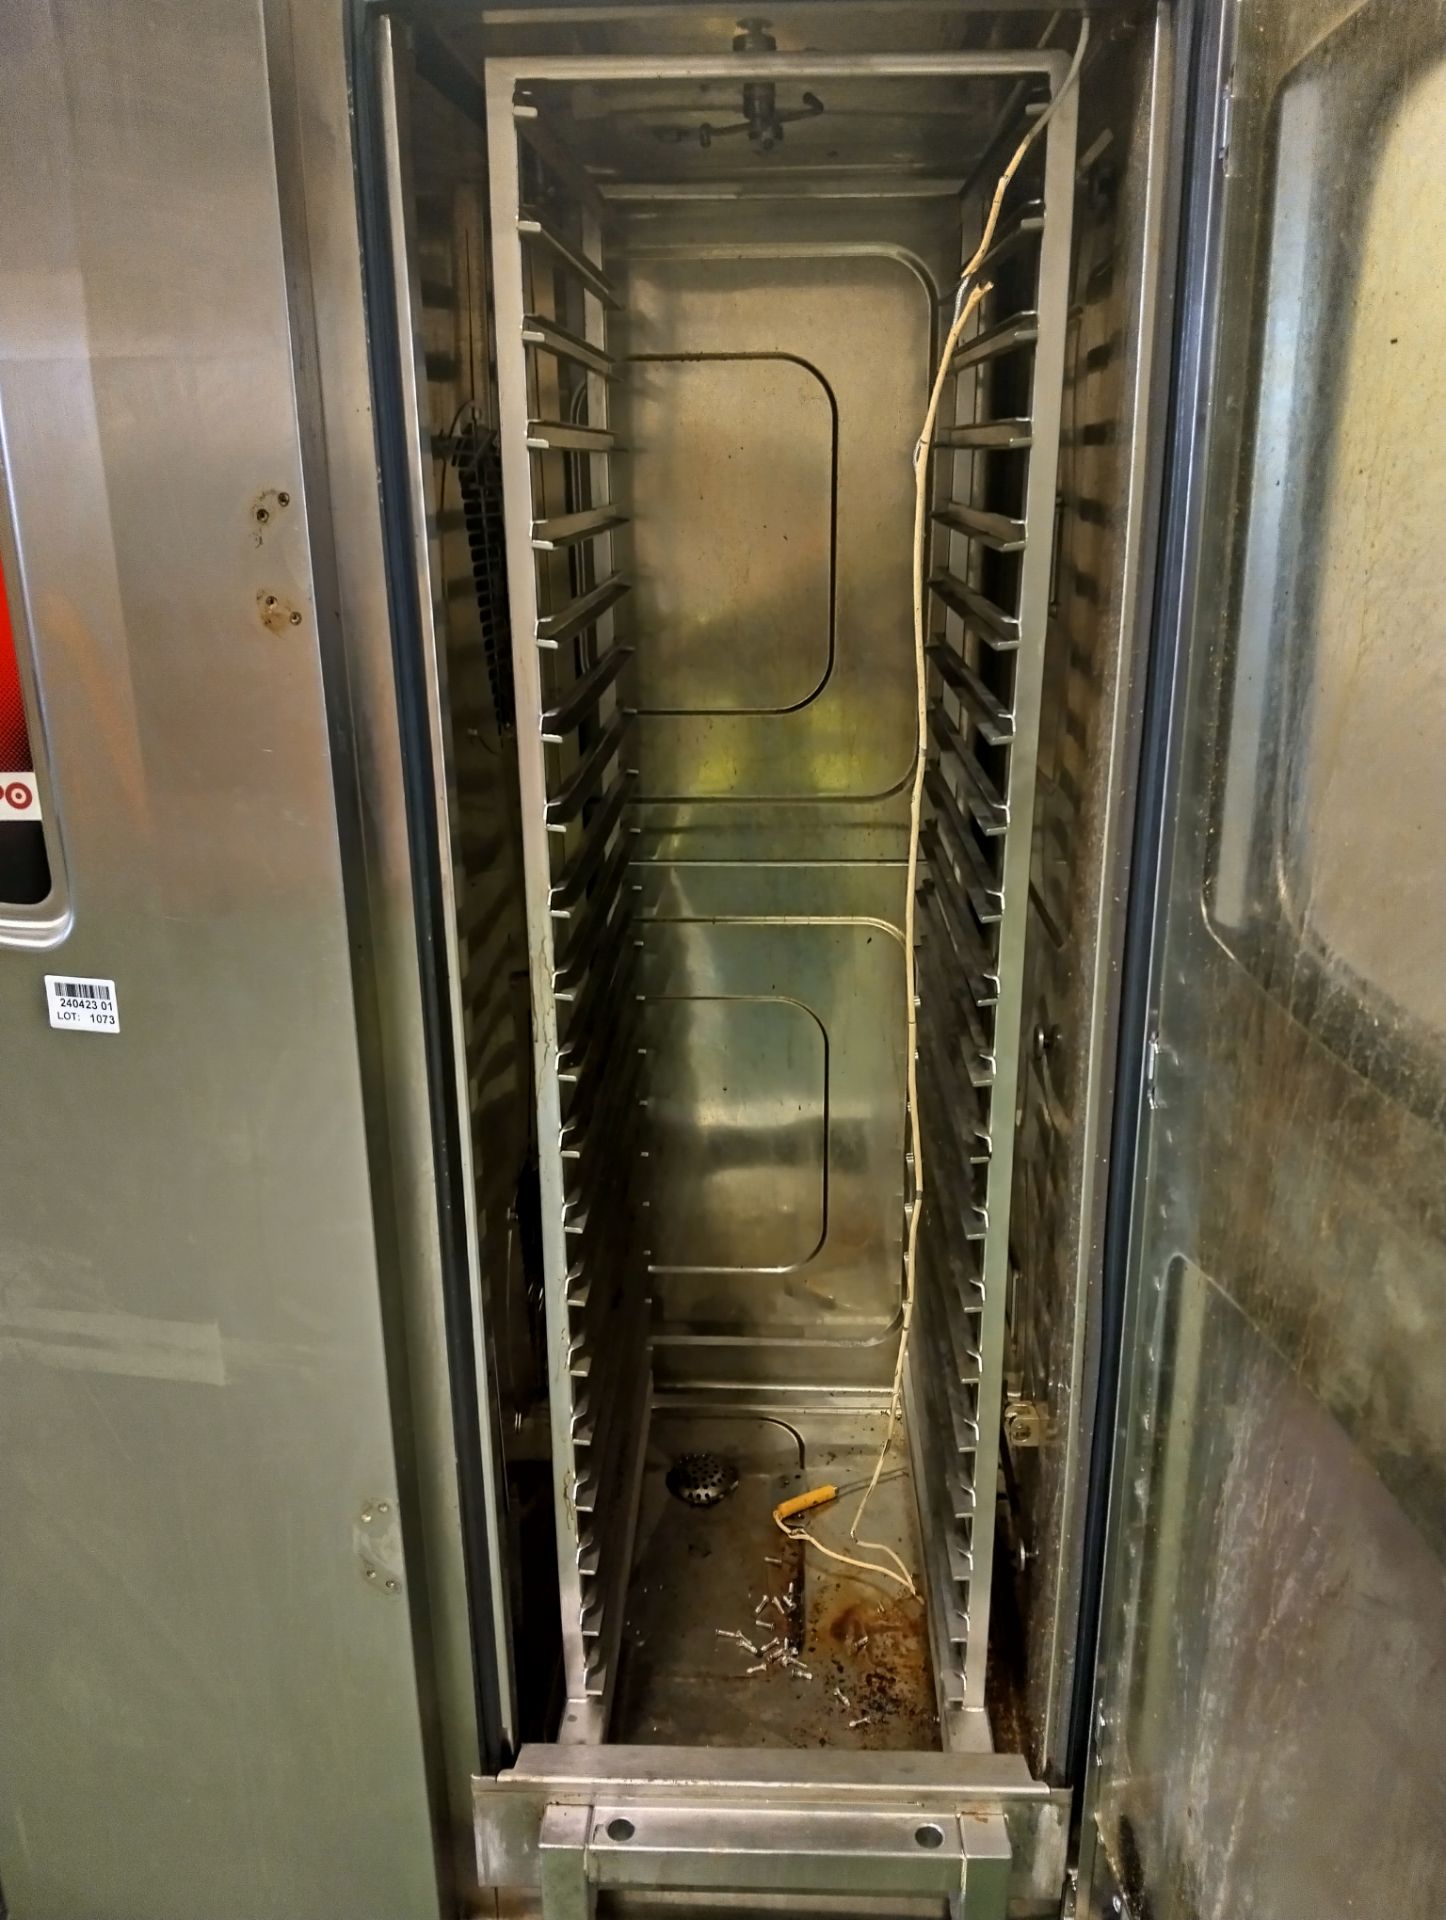 Angelo PO Rationale FM2011E3 stainless steel 20 grid combi oven - MISSING DOOR HANDLES - Image 3 of 5